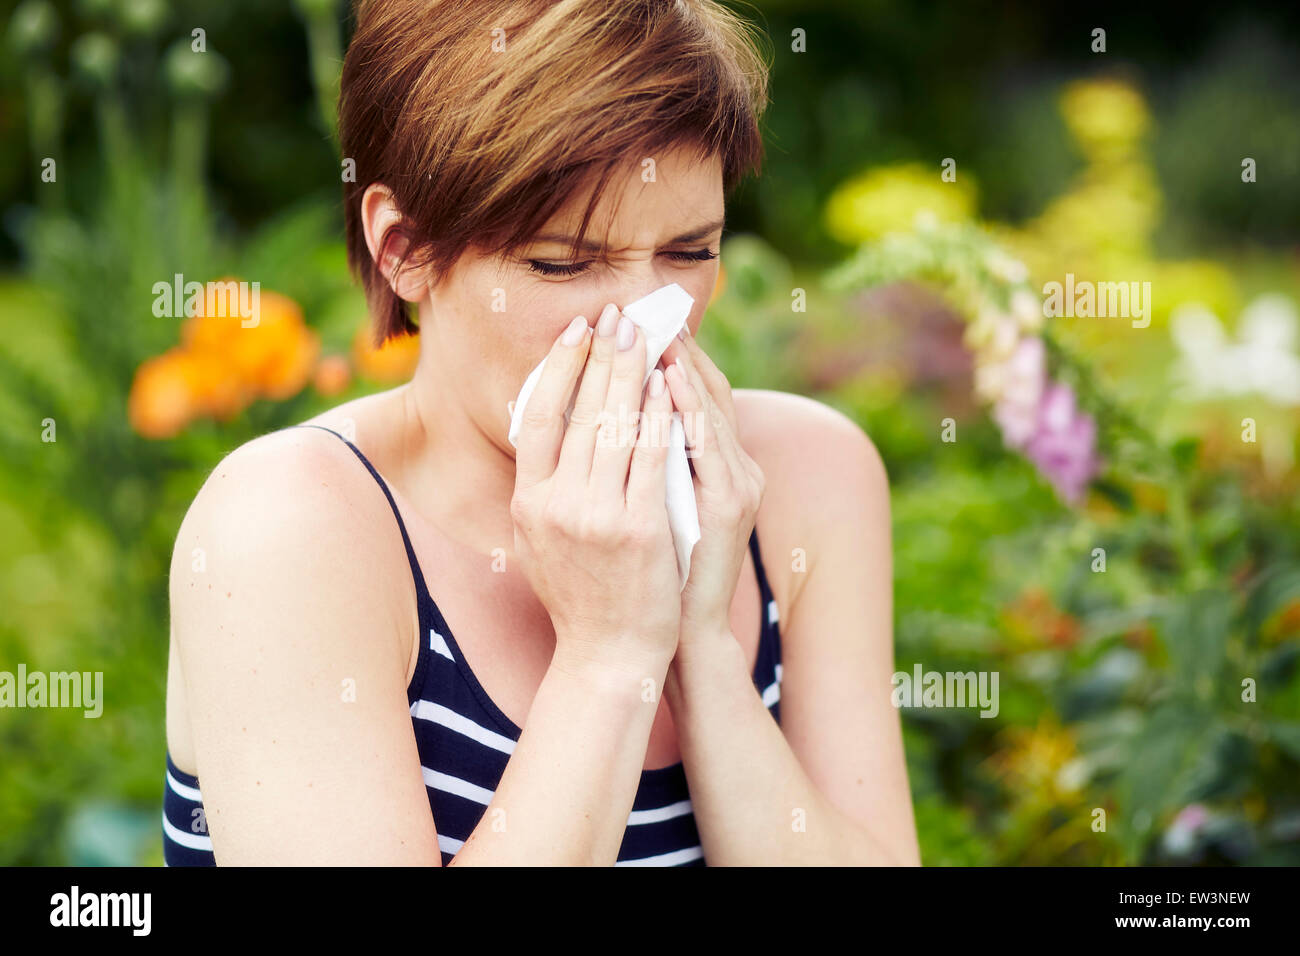 Girl with hayfever Stock Photo